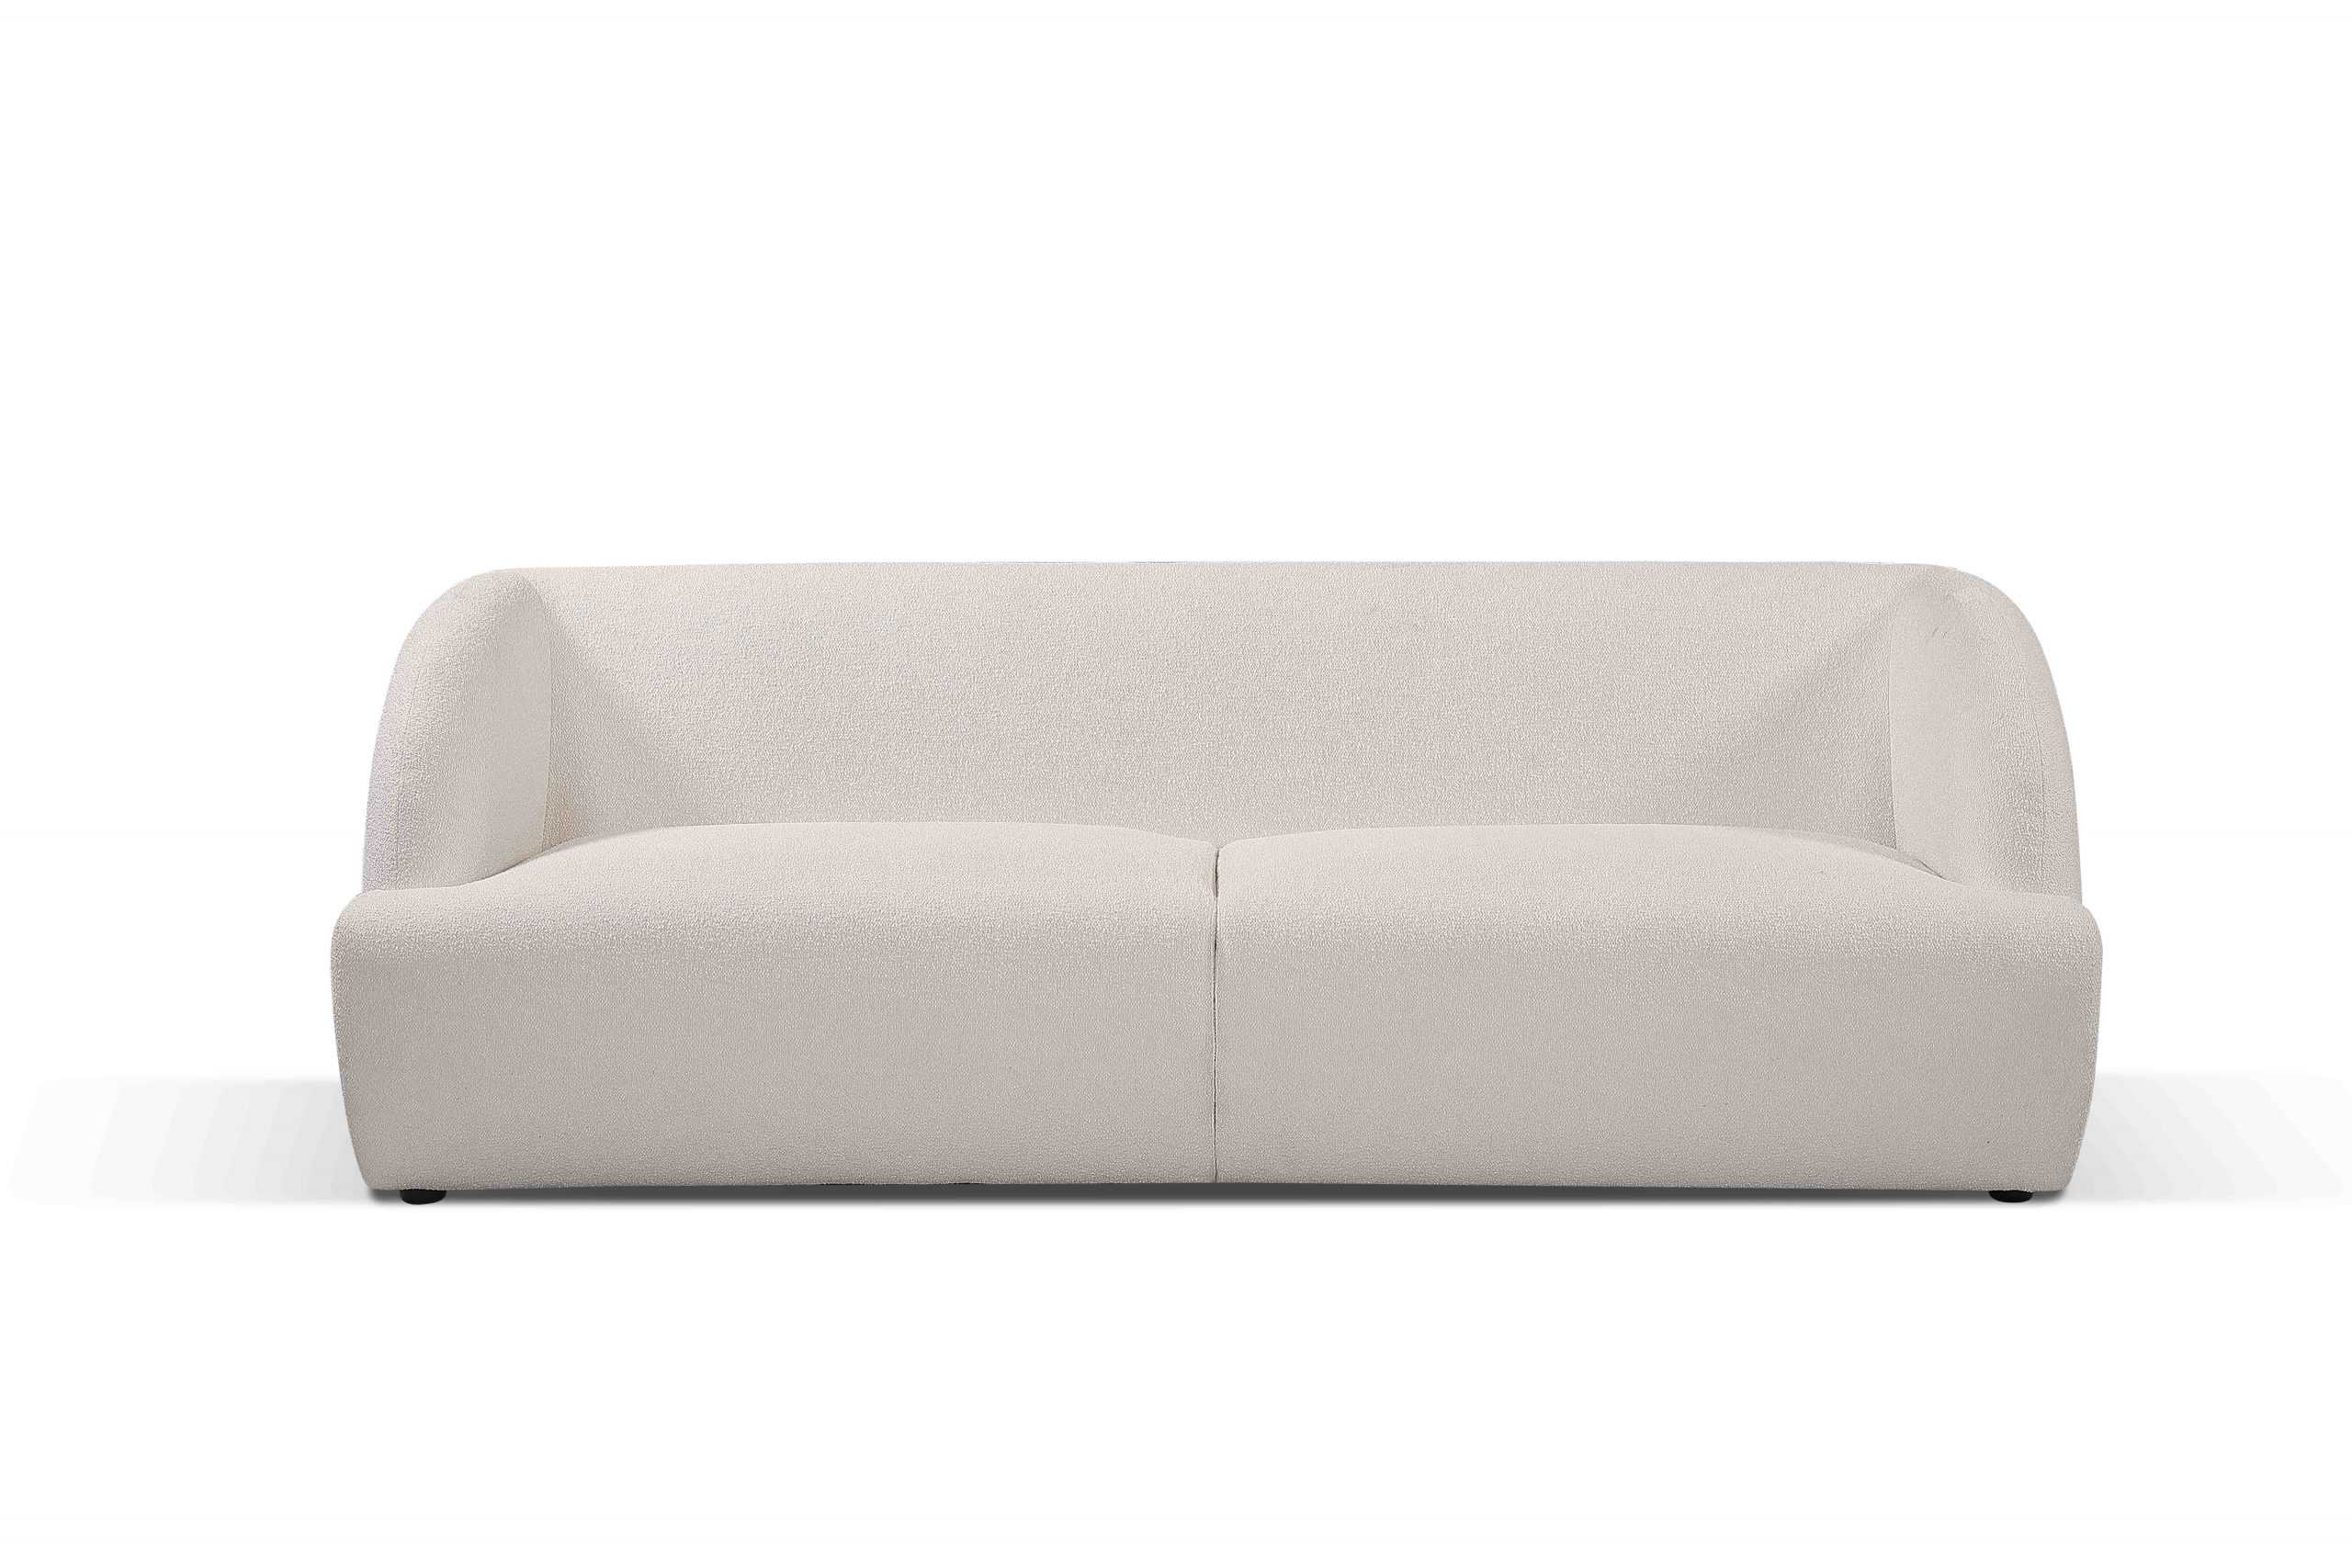 BT Orkney Fabric Upholstered 2 Seater Sofa